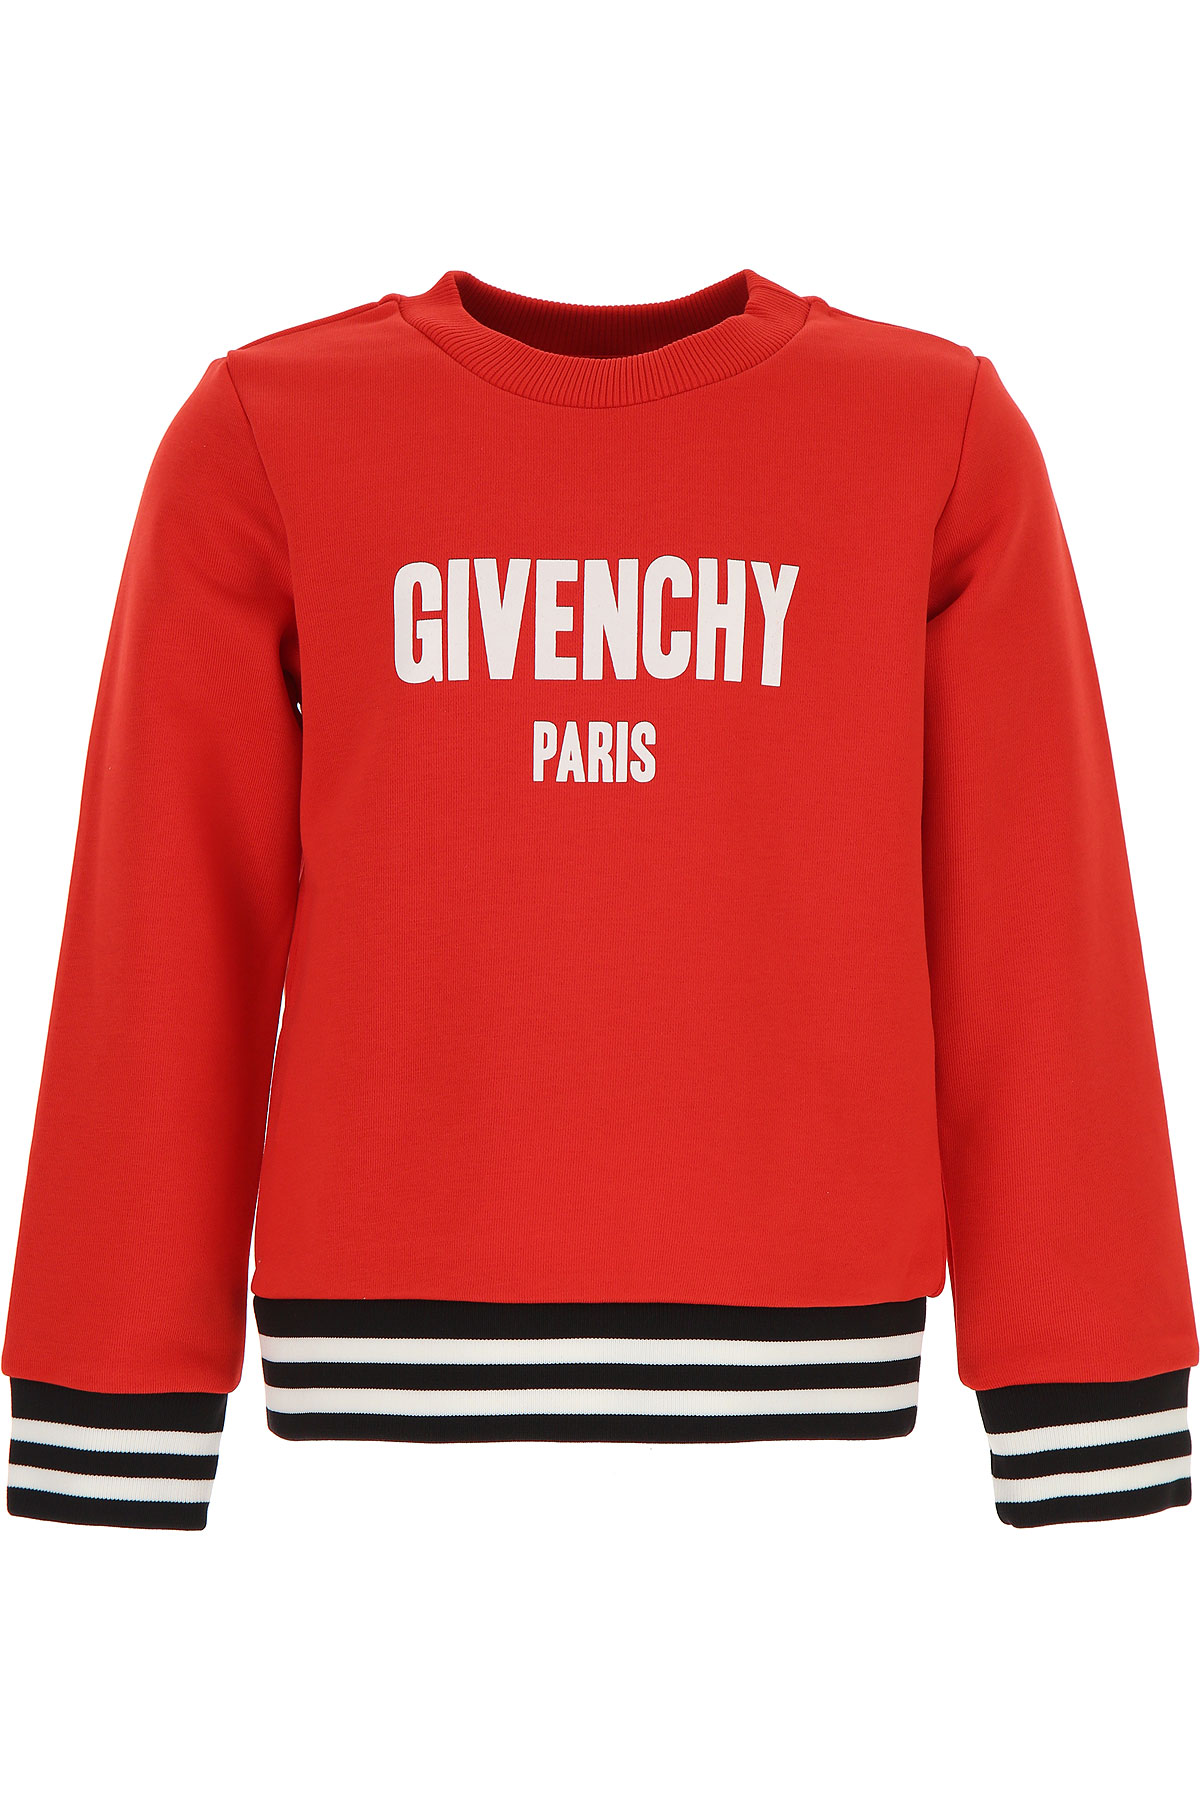 Kidswear Givenchy, Style code: h15063-991-